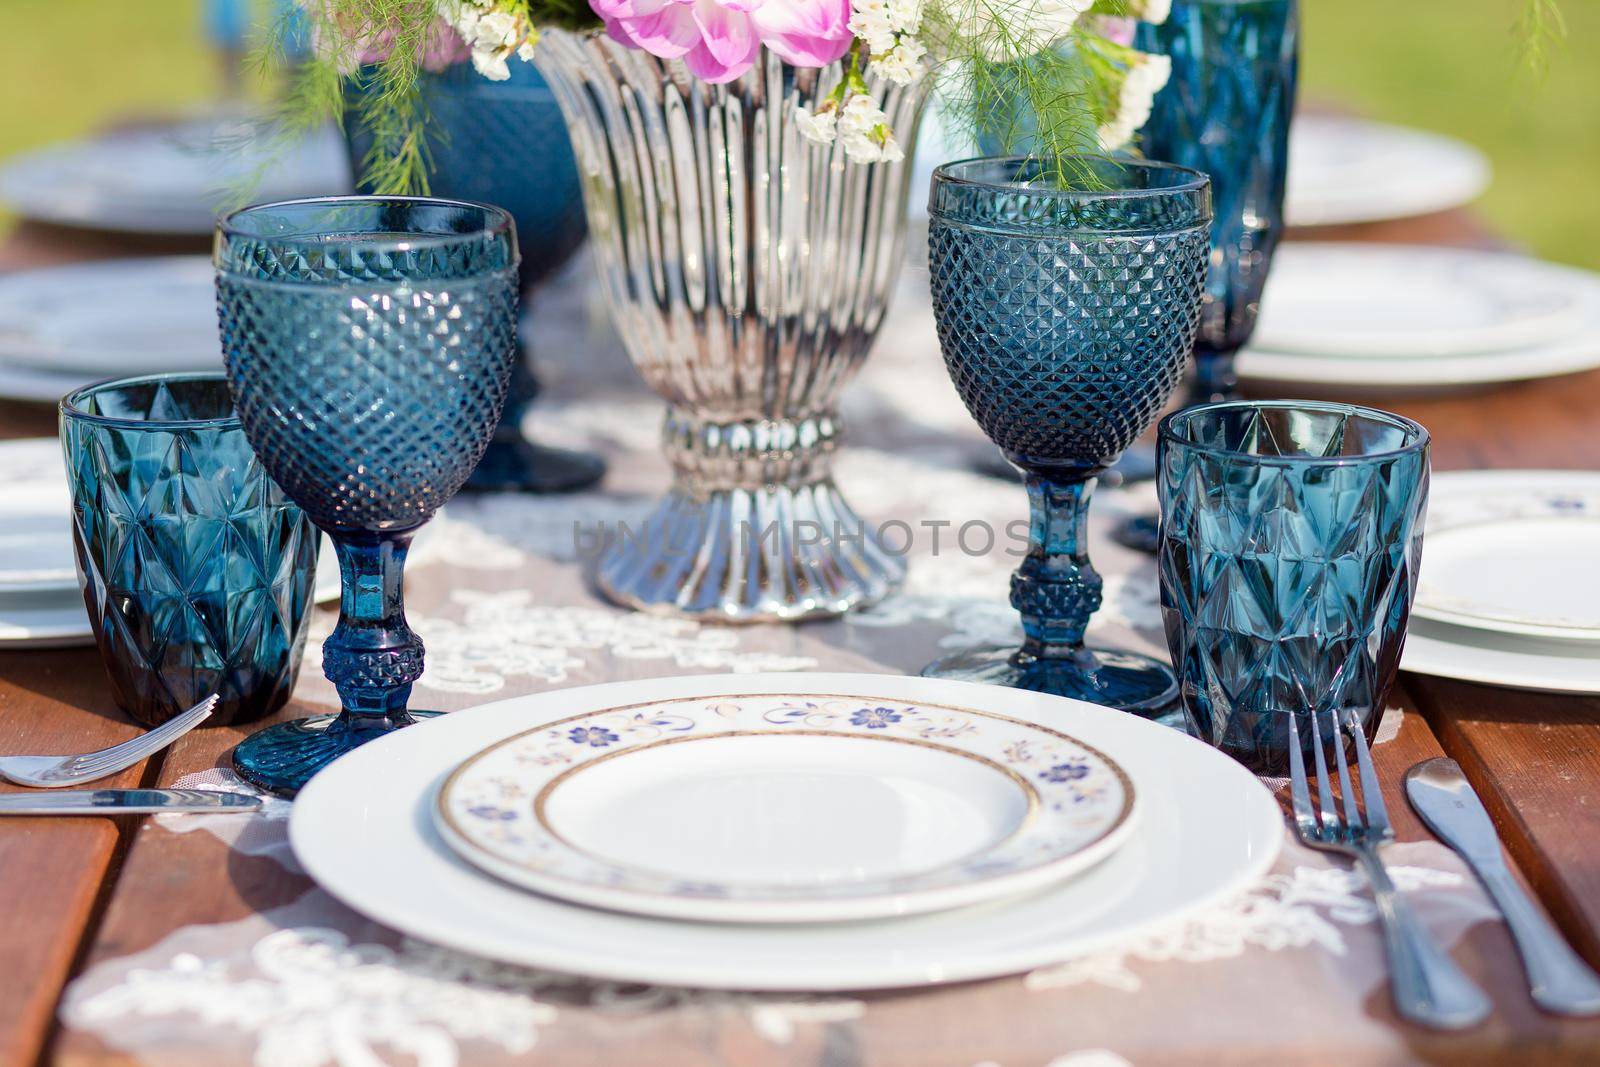 decorated for wedding elegant dinner table by BY-_-BY